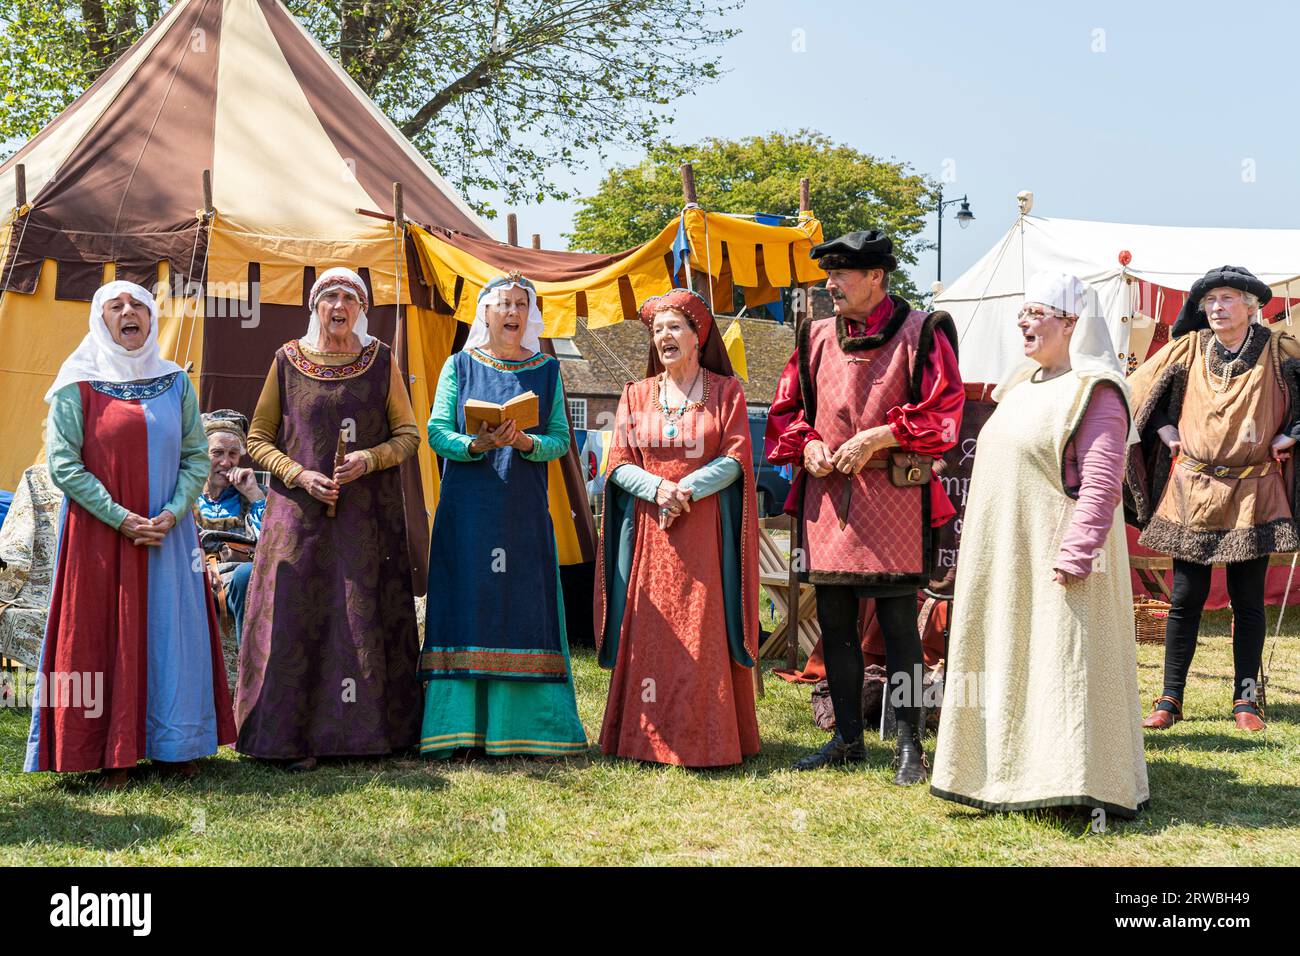 The Rough Musicke medieval group of troubadours in a line singing in front of a middles ages tent at a reenactment event during the summertime. Stock Photo